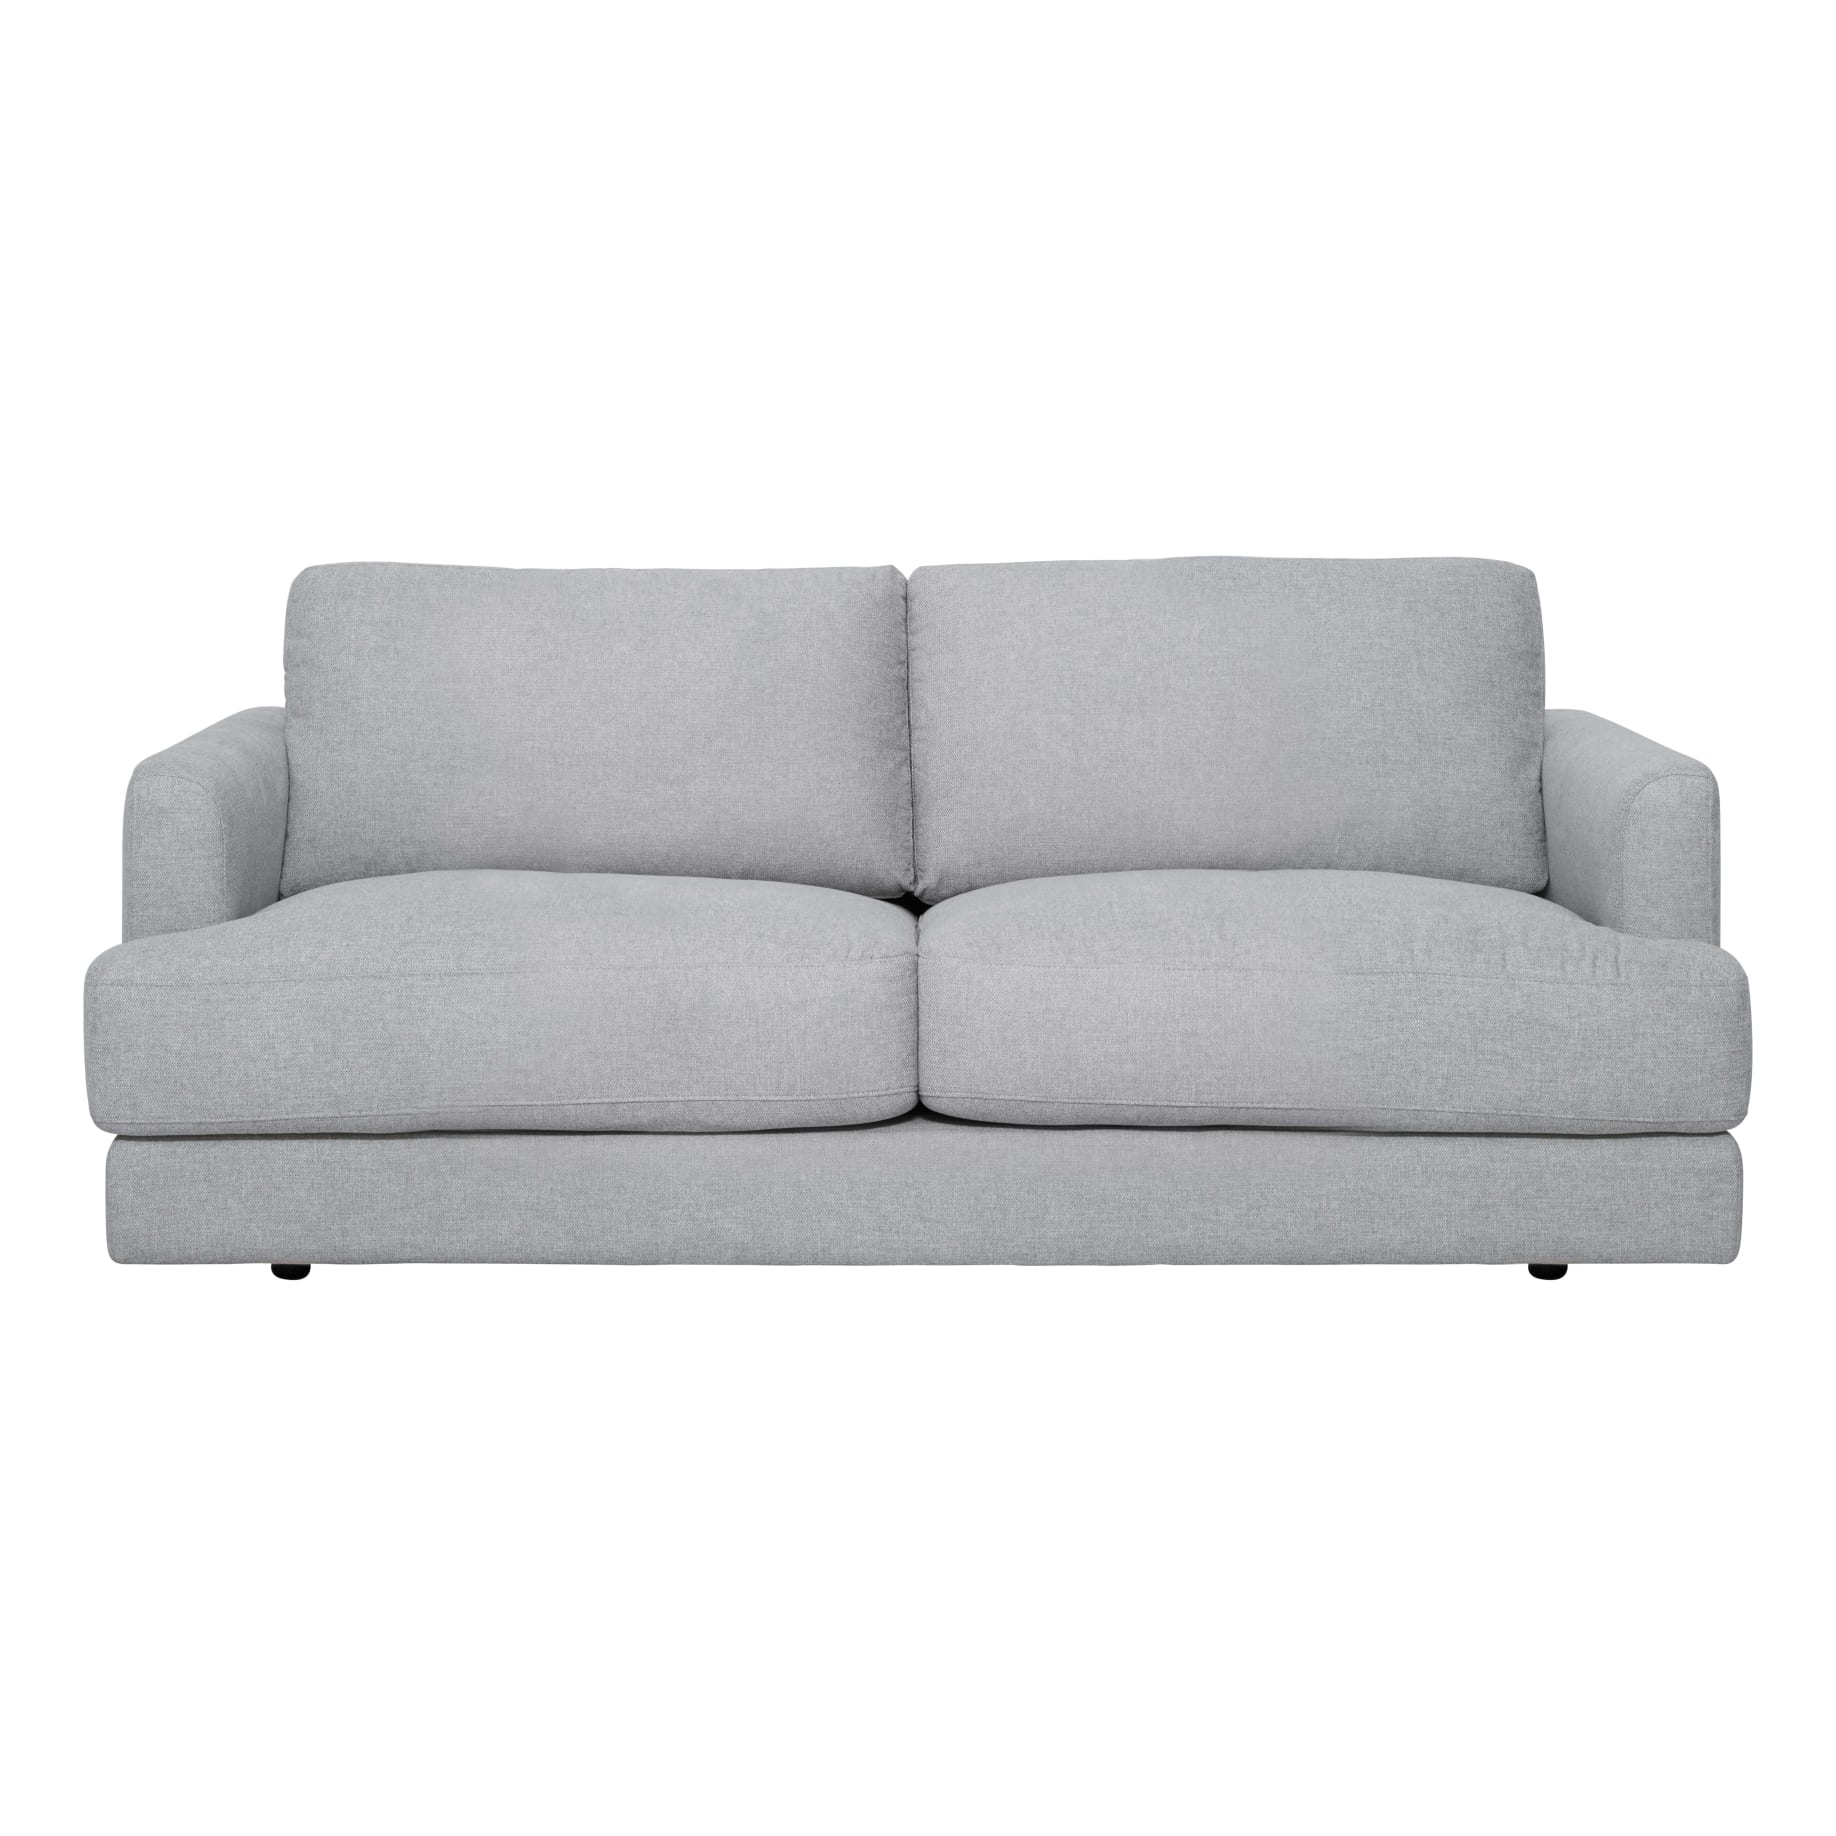 Temple 3 Seater with 2 Cushions in Belfast Grey